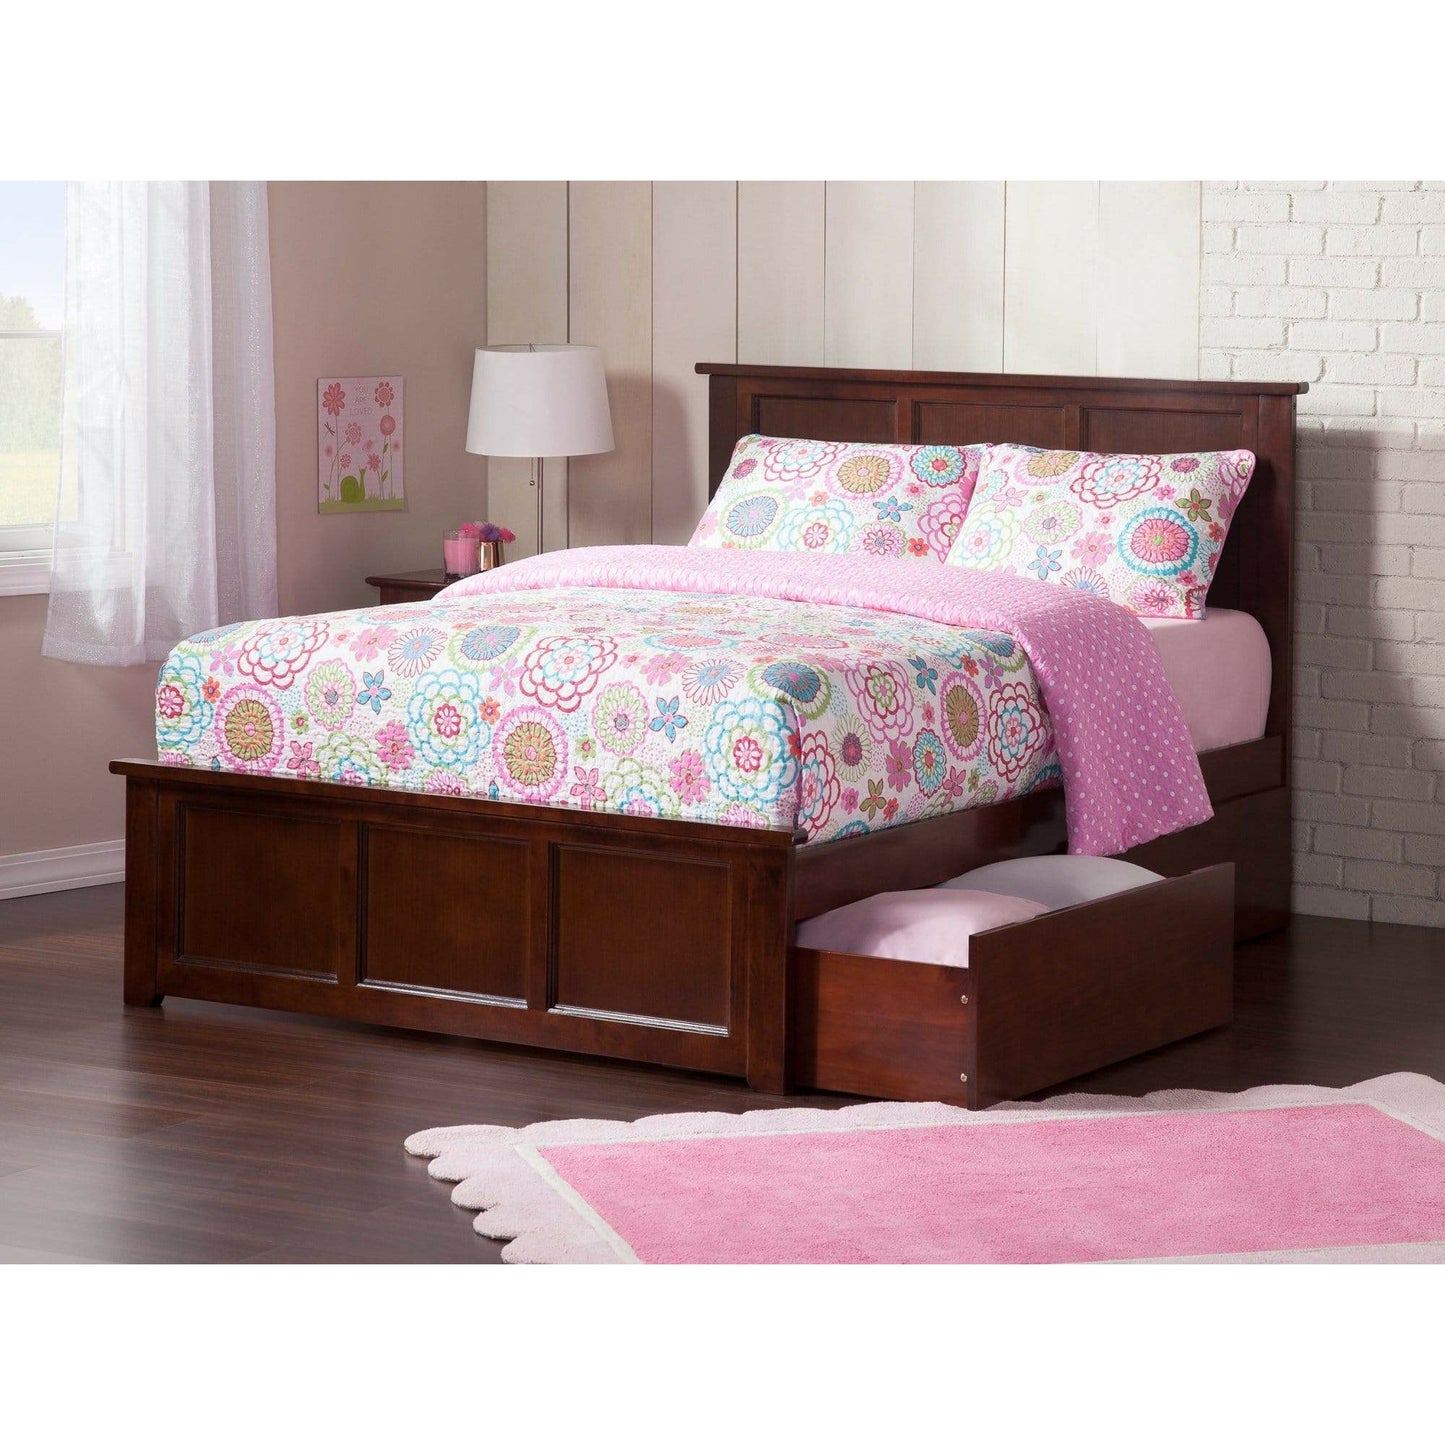 Atlantic Furniture Bed Walnut Madison Full Platform Bed with Matching Foot Board with 2 Urban Bed Drawers in Espresso